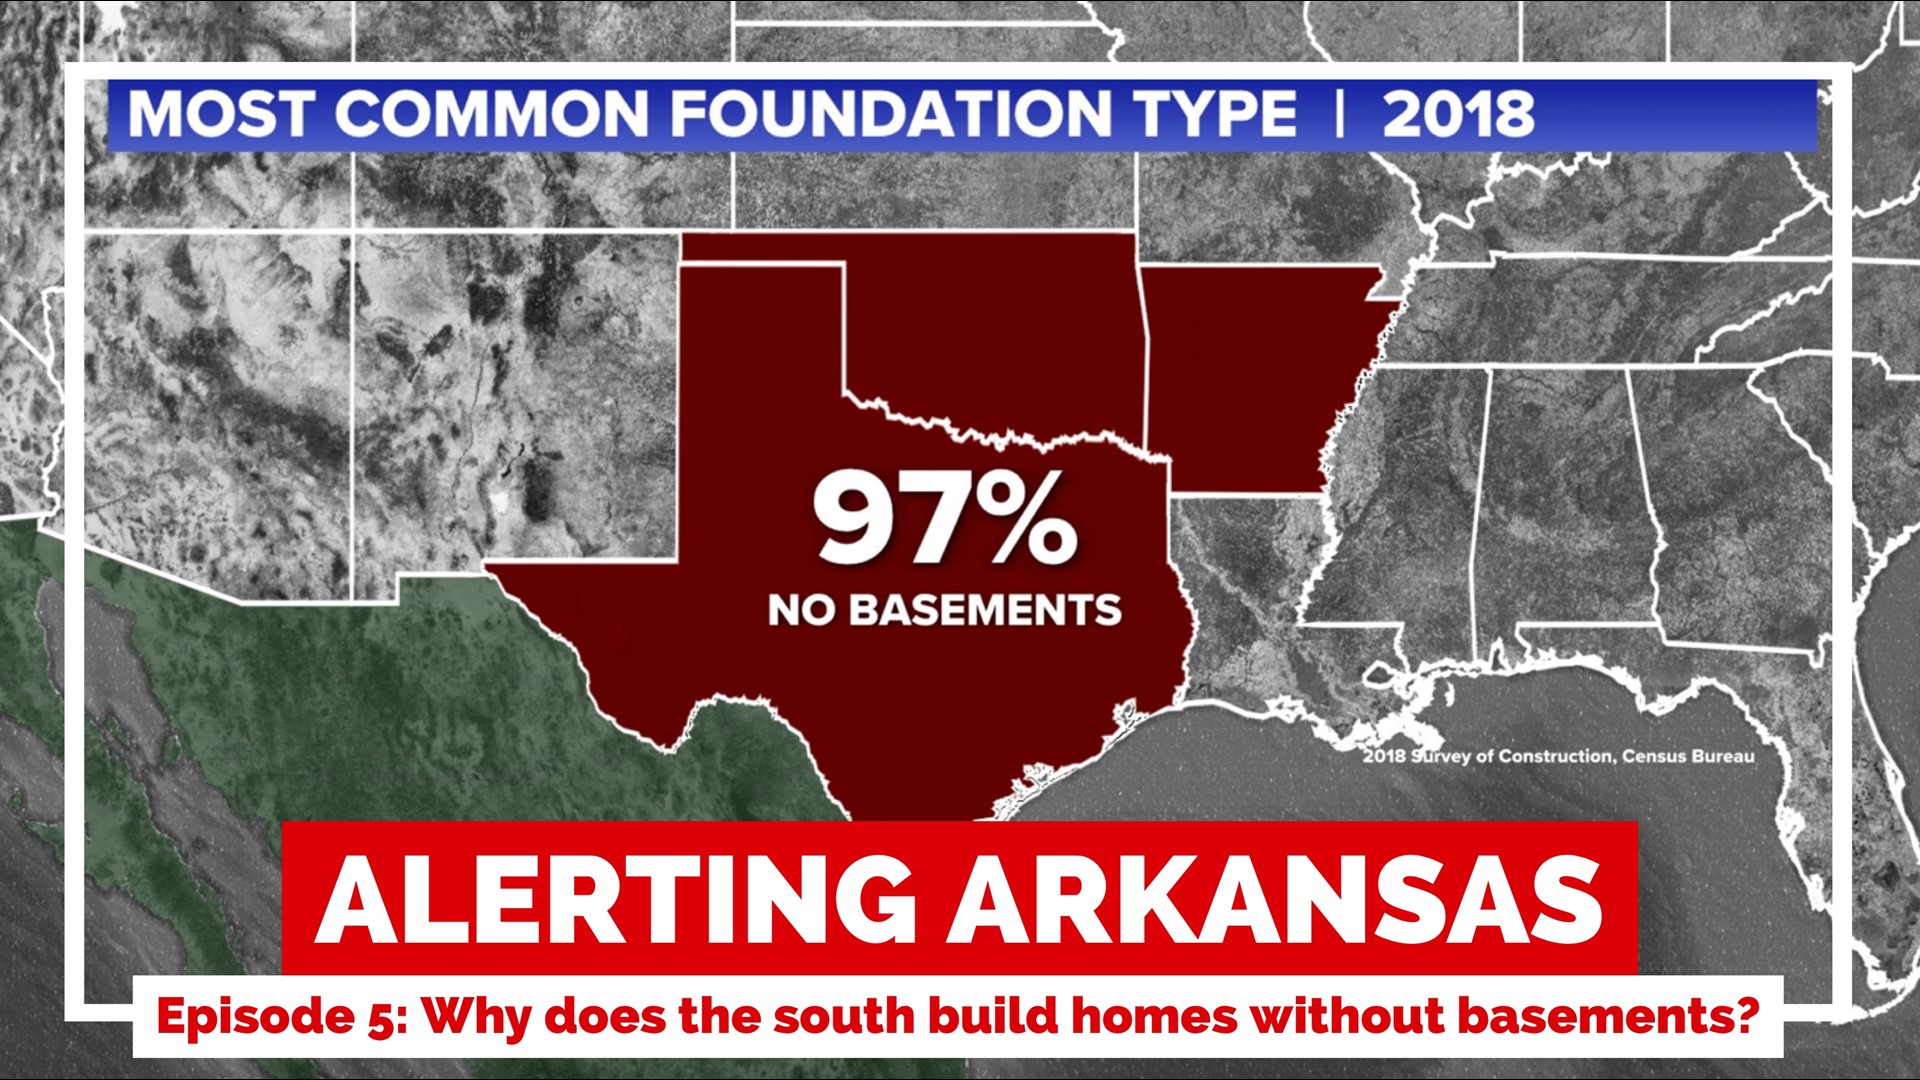 In 2018, 97% of homes built in Texas, Oklahoma, and Arkansas were built without basements, however tornadoes are so common here.